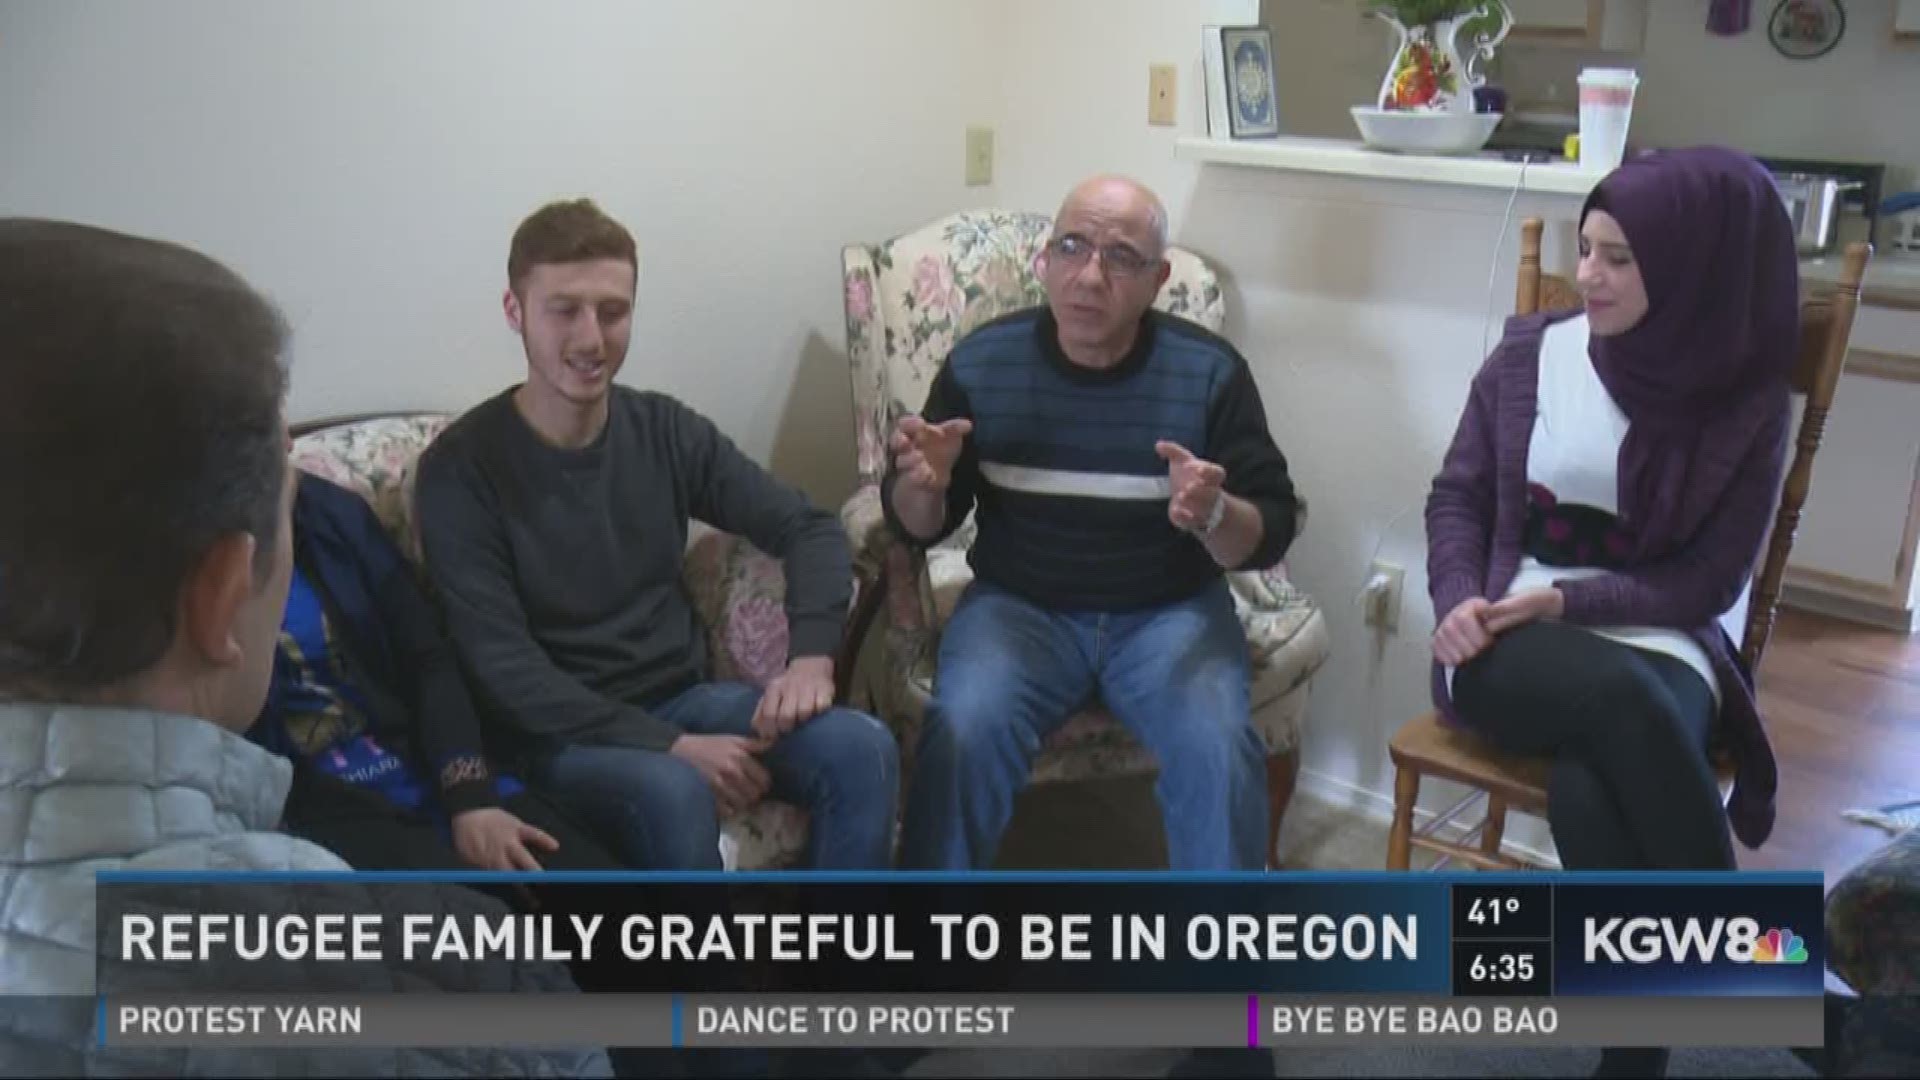 Update on a local family from Syria that is adjusting to life in Oregon